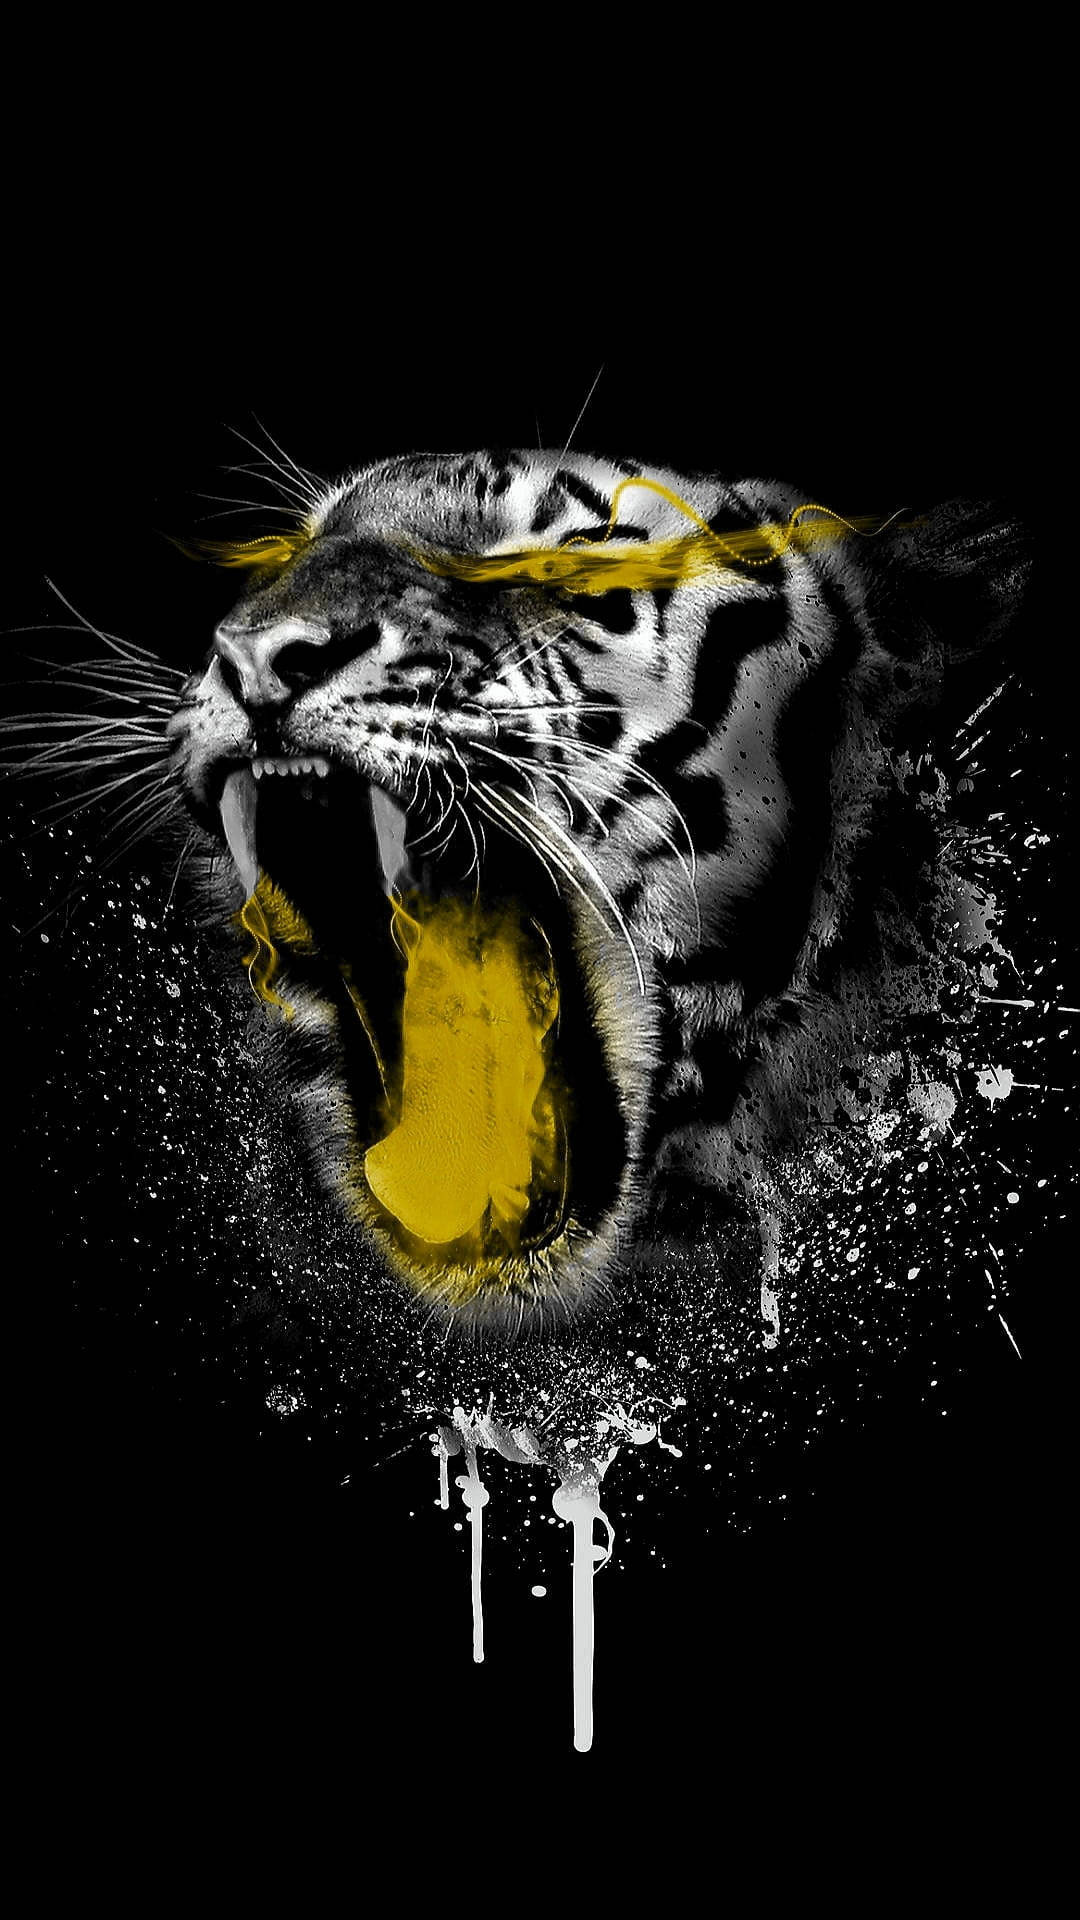 Black Tiger With Gold Accents Wallpaper